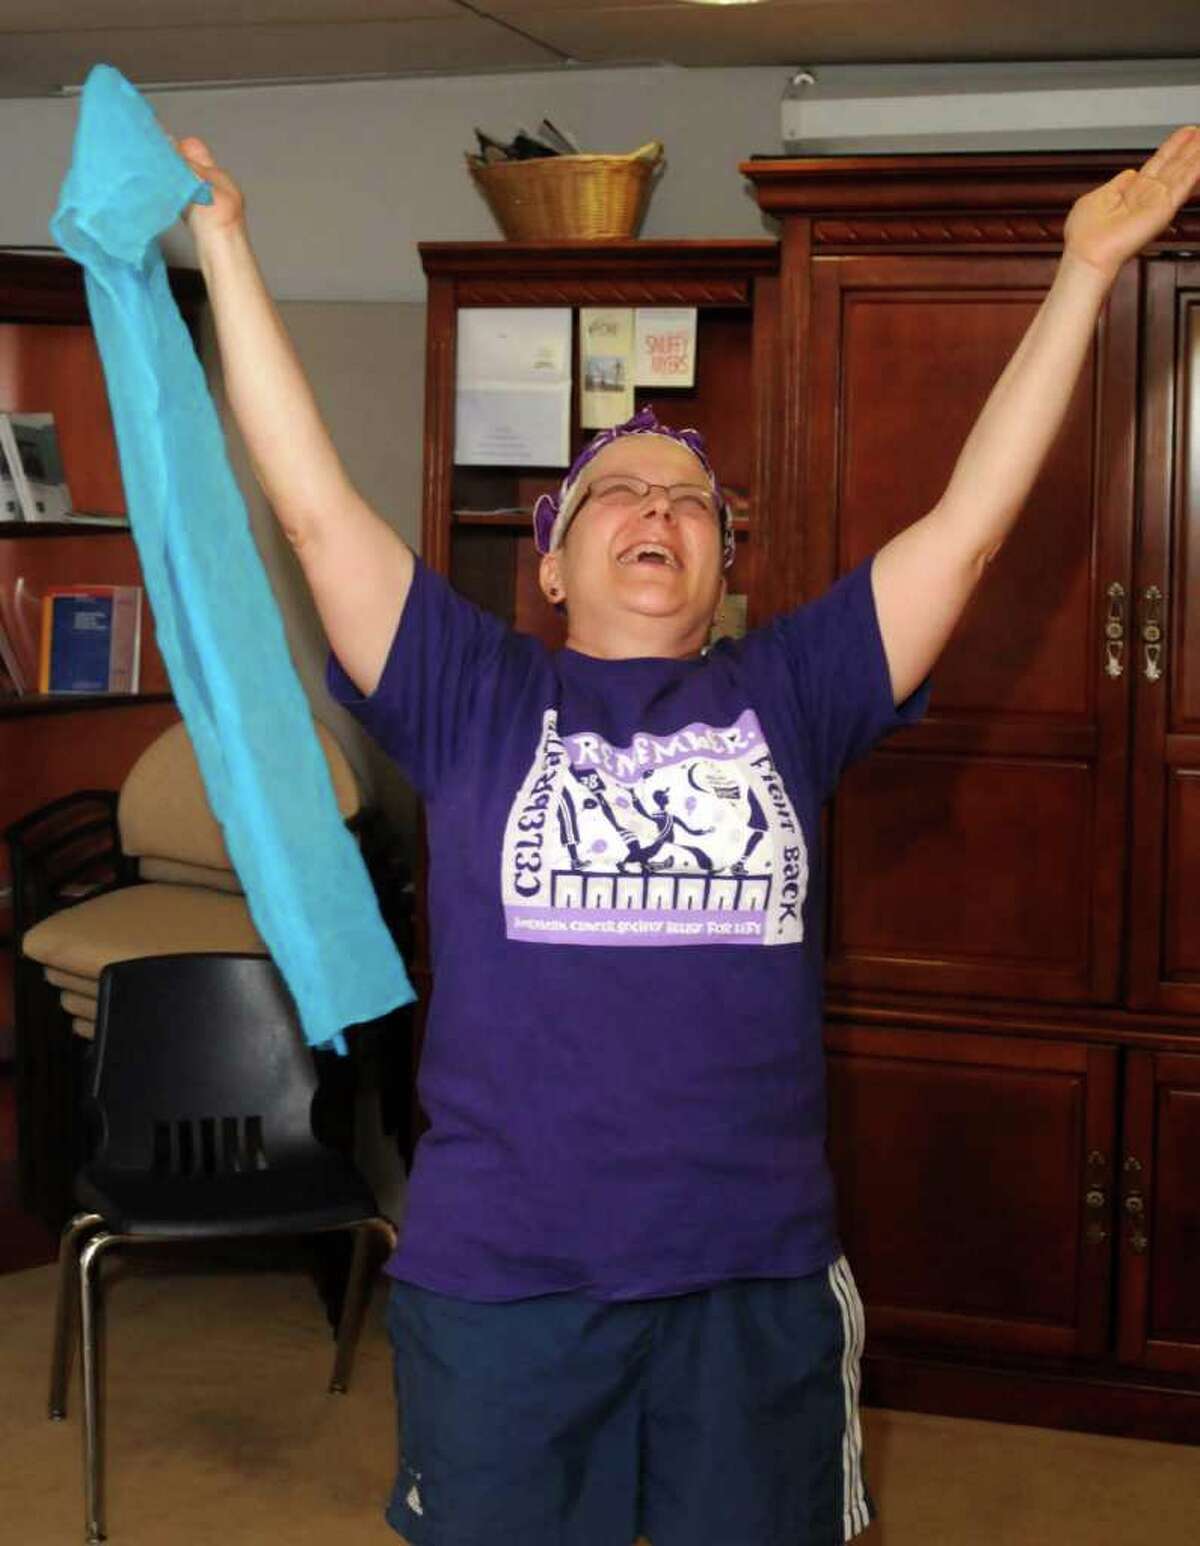 Ruth Heringa of Wingdale, N.Y. enjoys a workout on Thursday, May 27, 2010 at Ann's Place in Danbury. She is one of a group of breast cancer survivors that are instructed by Alison DiPinto in the Lebed Method of movement.